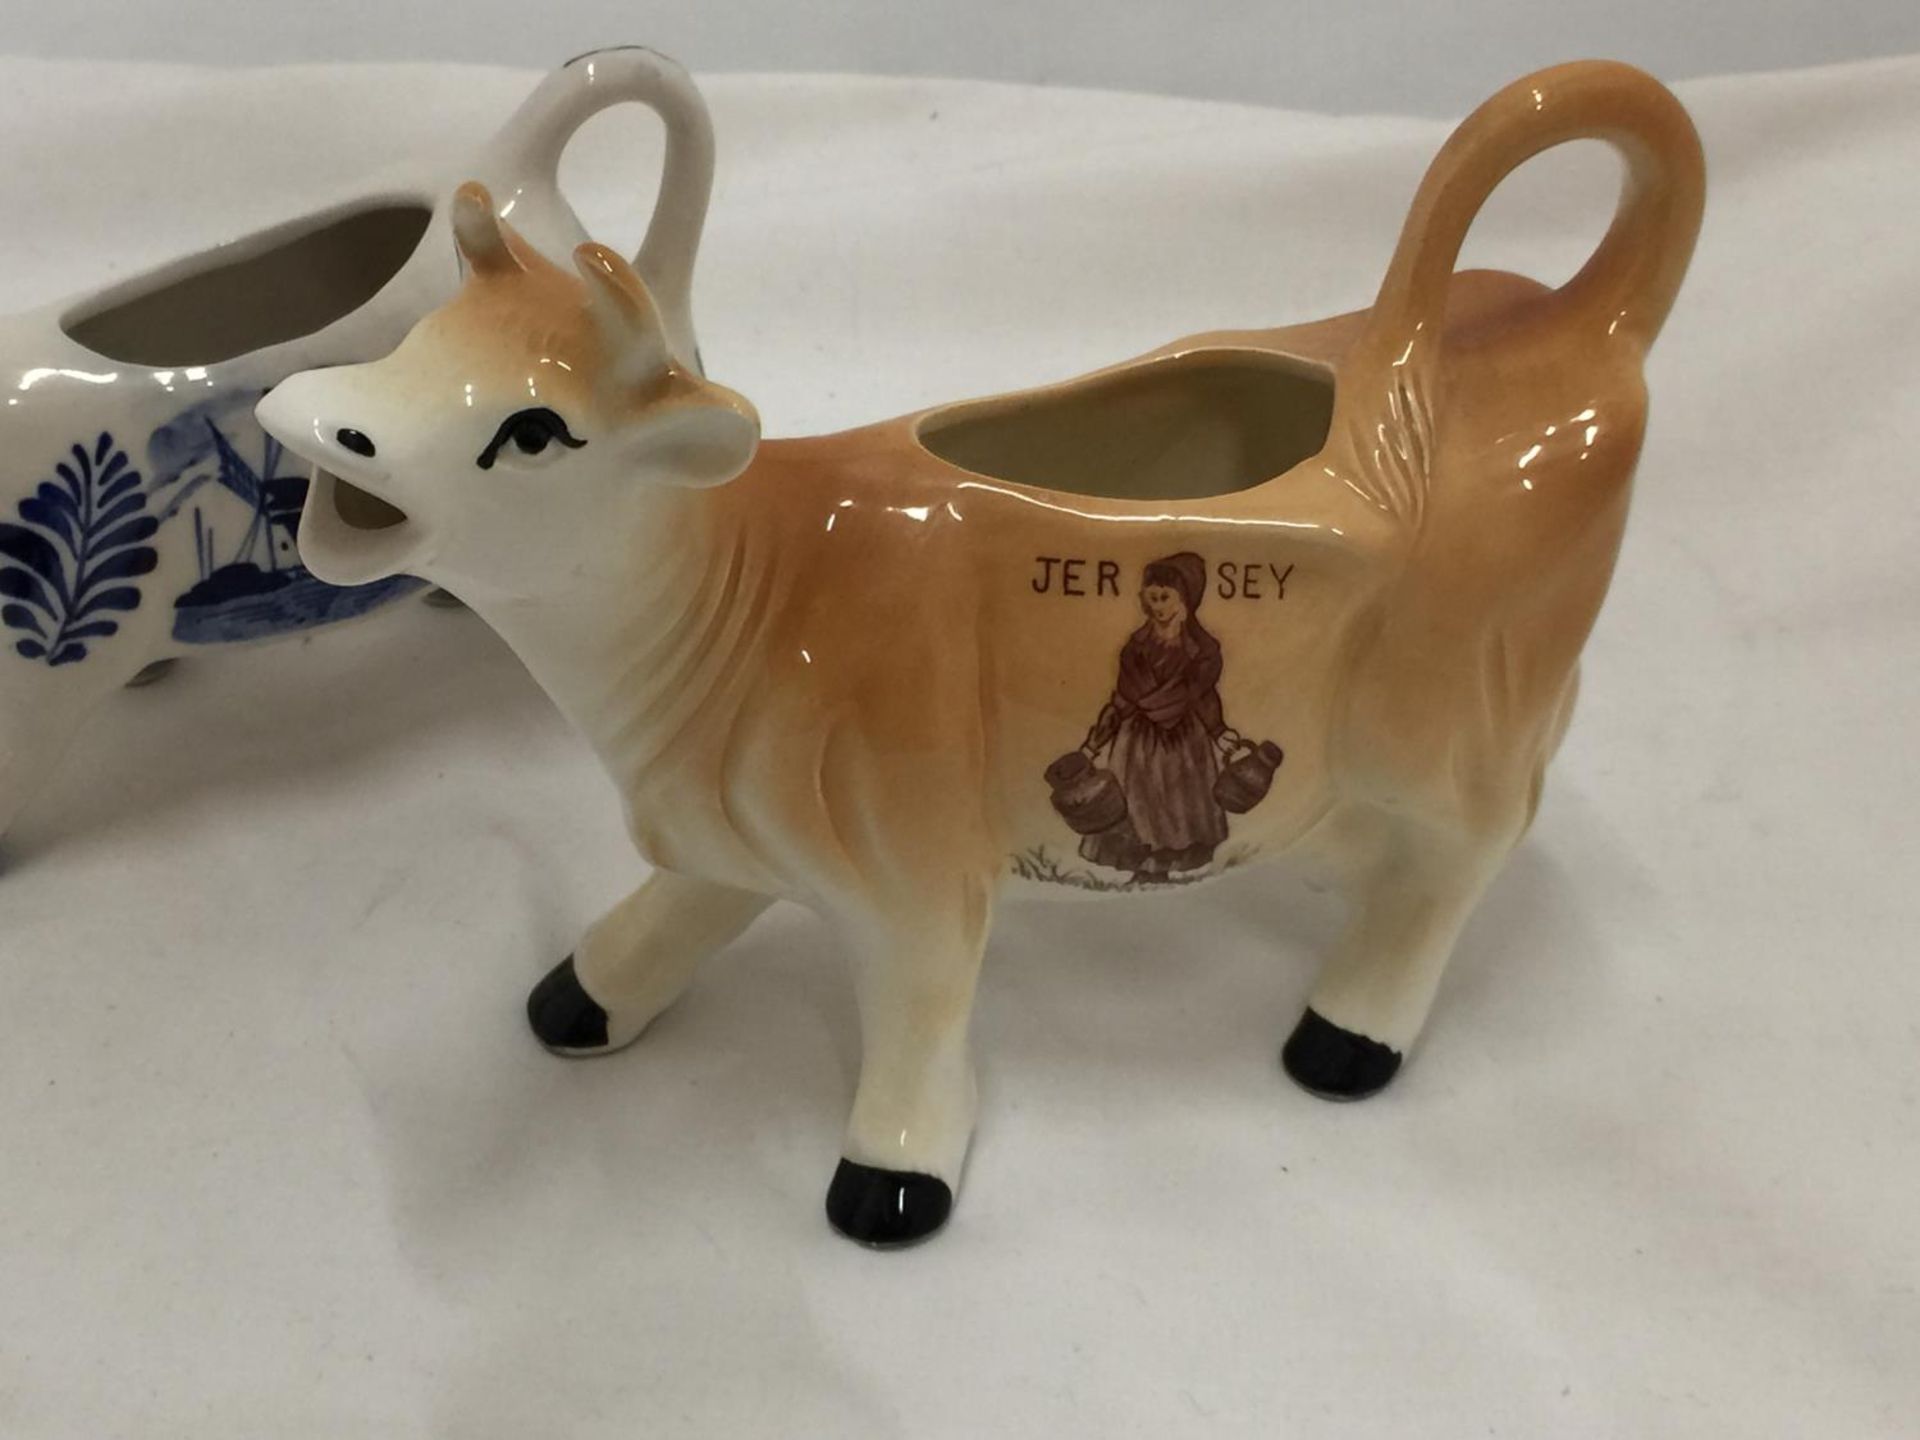 A DELFT BLUE HANDPAINTED COW CREAMER AND A JERSEY COW CREAMER - Image 2 of 7